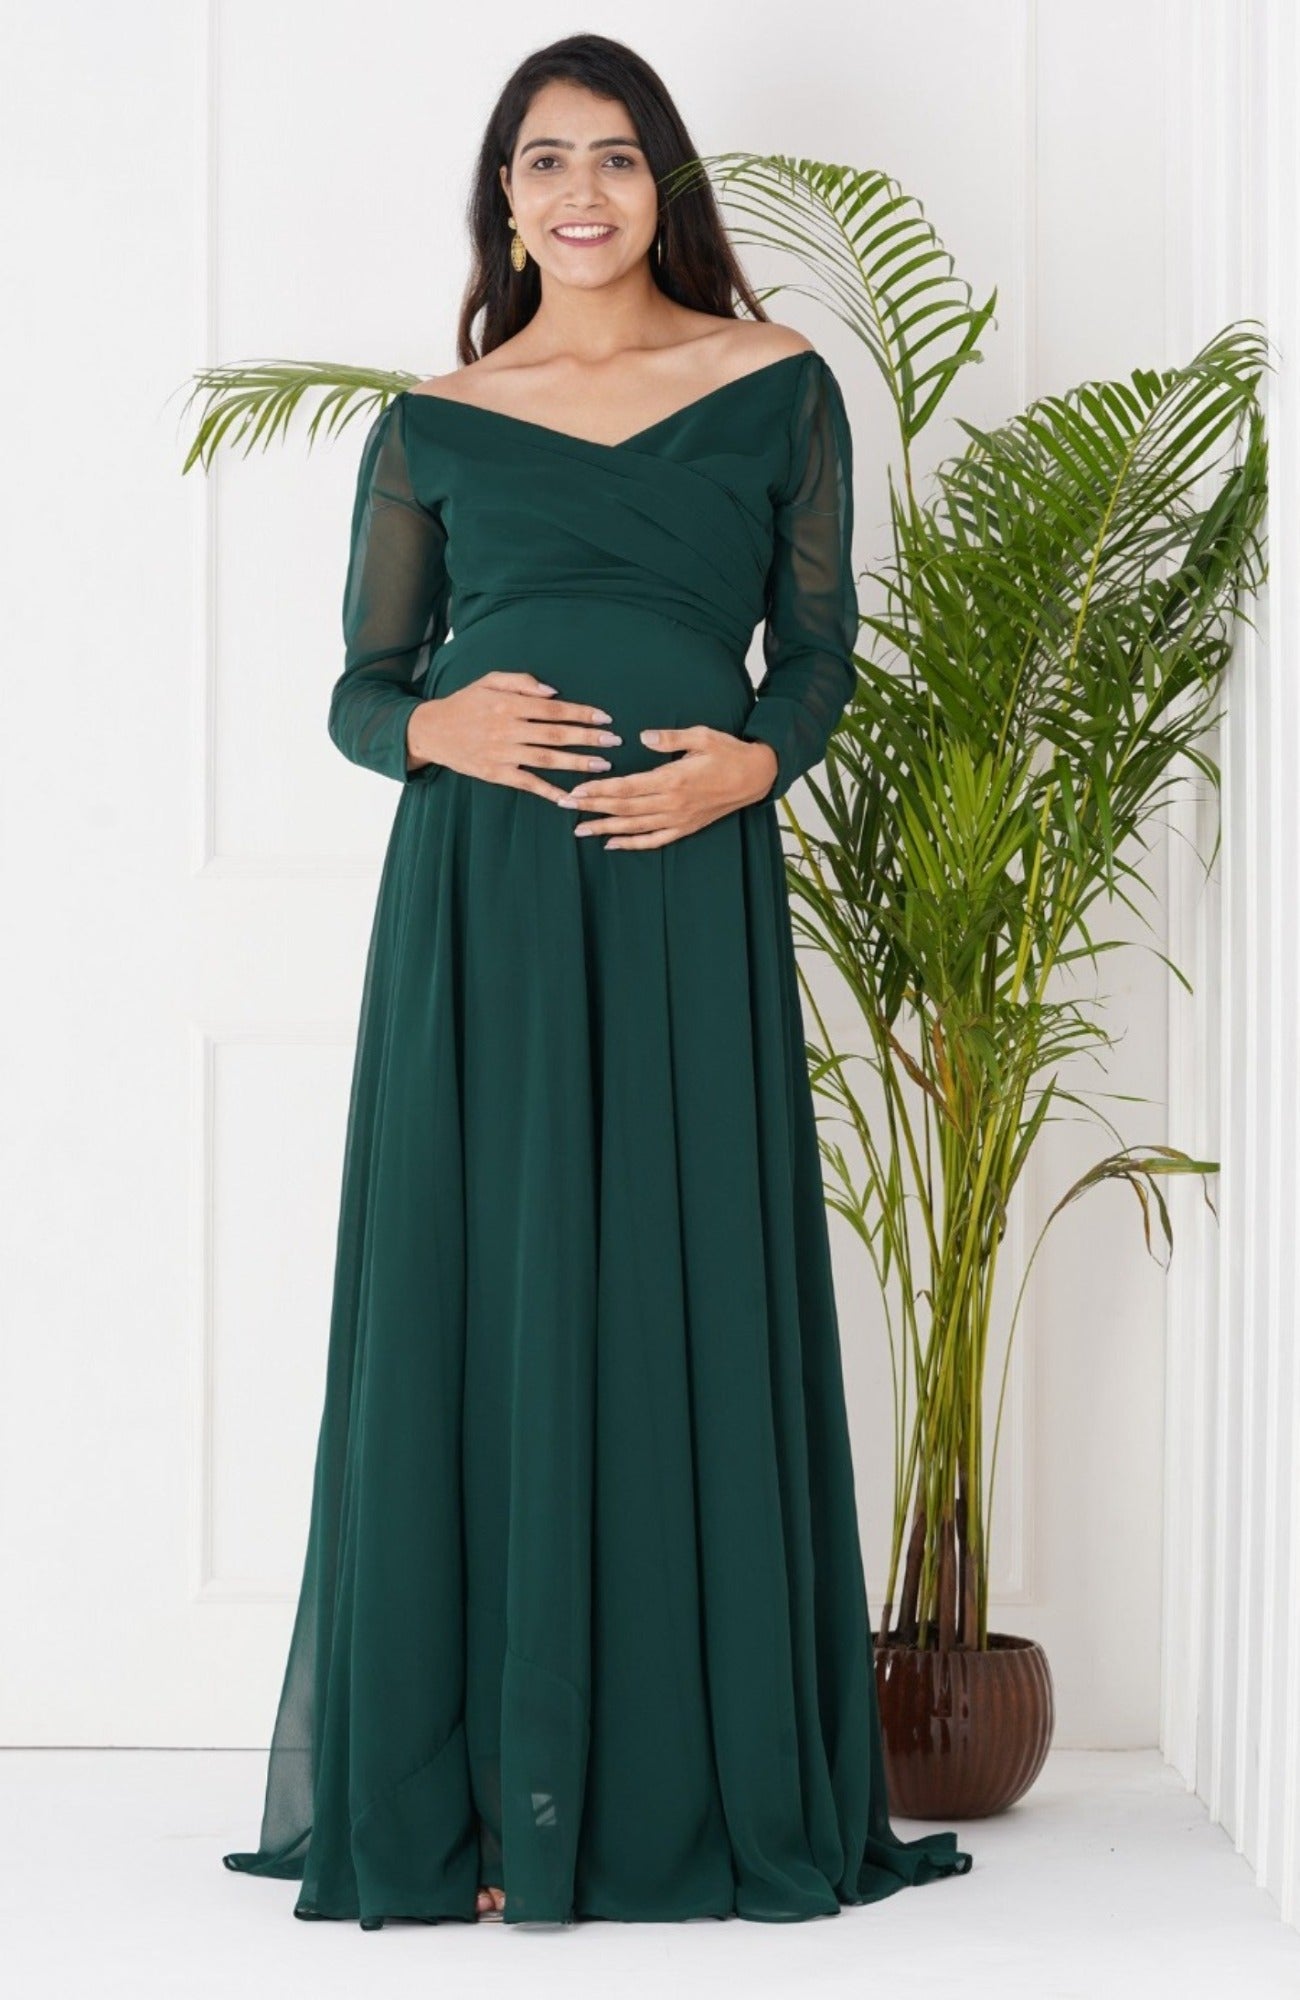 Black Sexy Maternity Evening Dresses For Baby Showers Party Tulle Pregnant  Women Pregnancy Photoshoot Maxi Gown Photography Prop - AliExpress